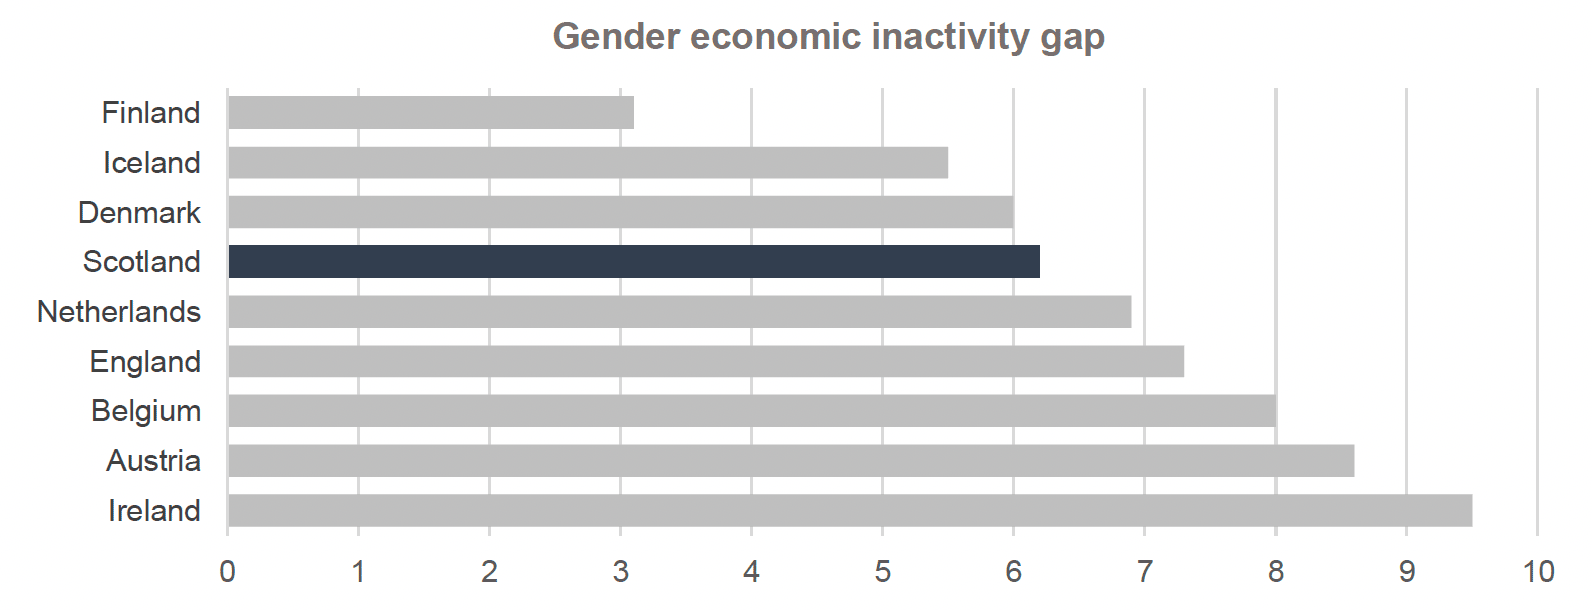 Graph depicts the gender economic inactivity gap observed in all countries included in the International Framework for 2021, in a bar chart, highlighting Scotland’s figure in a different colour. Scotland is fourth out of nine countries. In Finland, the gender economic inactivity gap was at 3.1 percentage points. In Iceland, the gender economic inactivity gap was at 5.5 percentage points. In Denmark, the gender economic inactivity gap was at 6 percentage points. In Scotland, the gender economic inactivity gap was at 6.2 percentage points. In the Netherlands, the gender economic inactivity gap was at 6.9 percentage points. In England, the gender economic inactivity gap was at 7.3 percentage points. In Belgium, the gender economic inactivity gap was at 8 percentage points. In Austria, the gender economic inactivity gap was at 8.6 percentage points. In Ireland, the gender economic inactivity gap was at 9.5 percentage points.